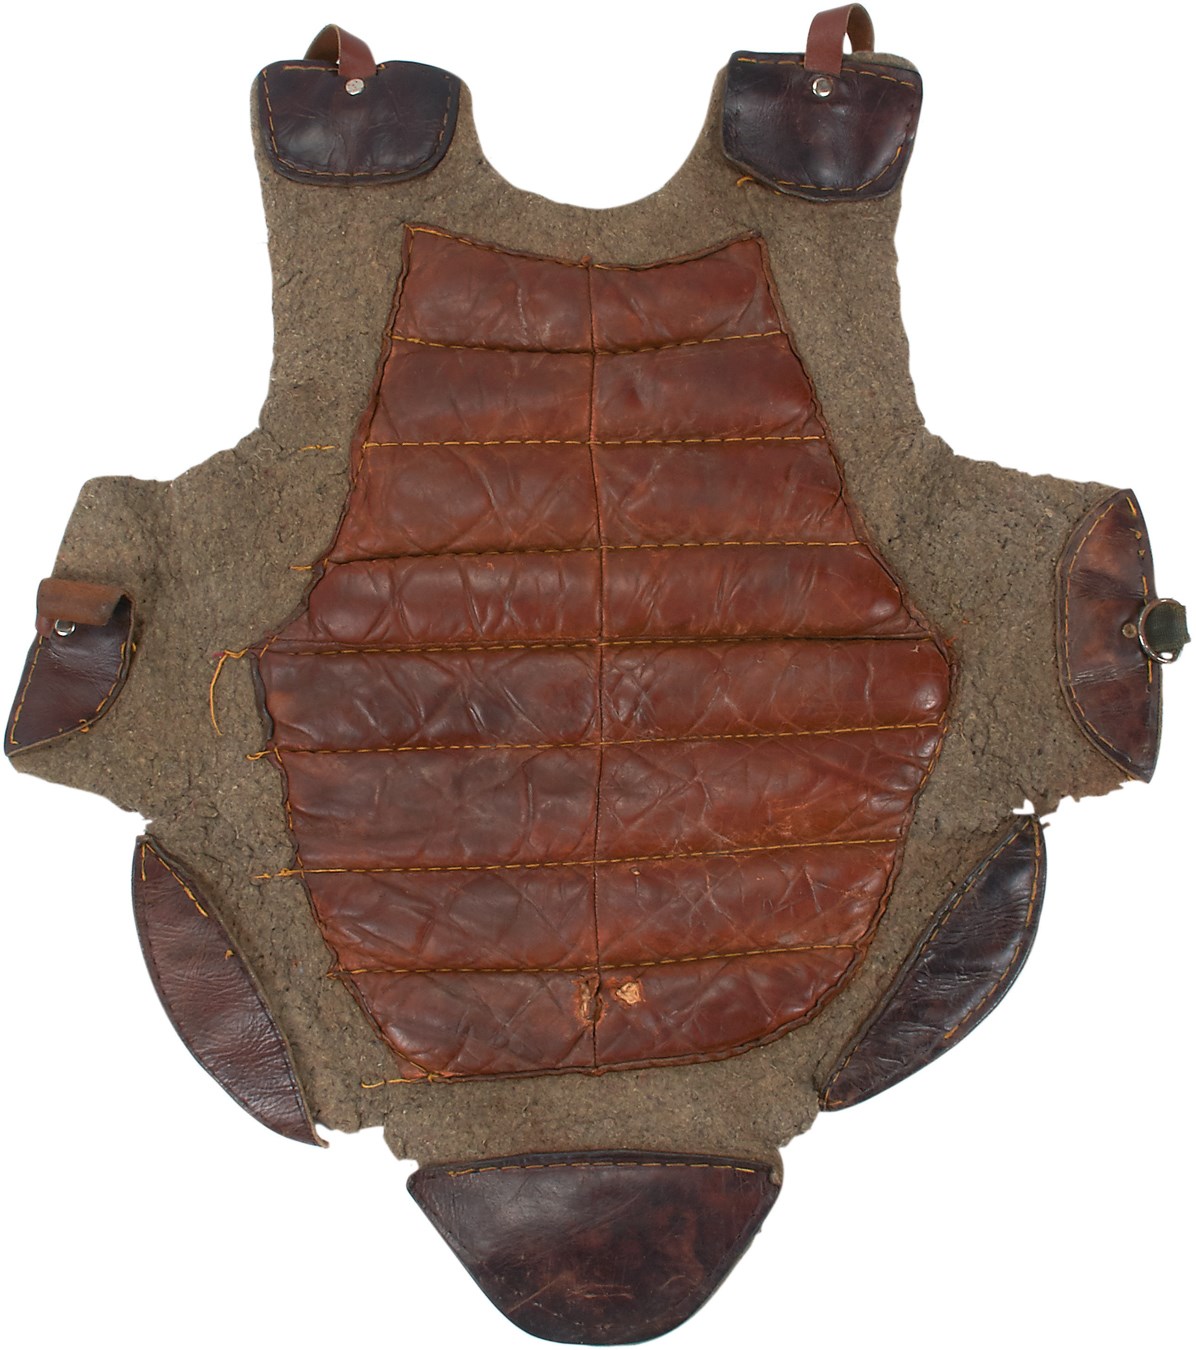 Antique Sporting Goods - Rare Quilted Leather Catcher's Chest Protector